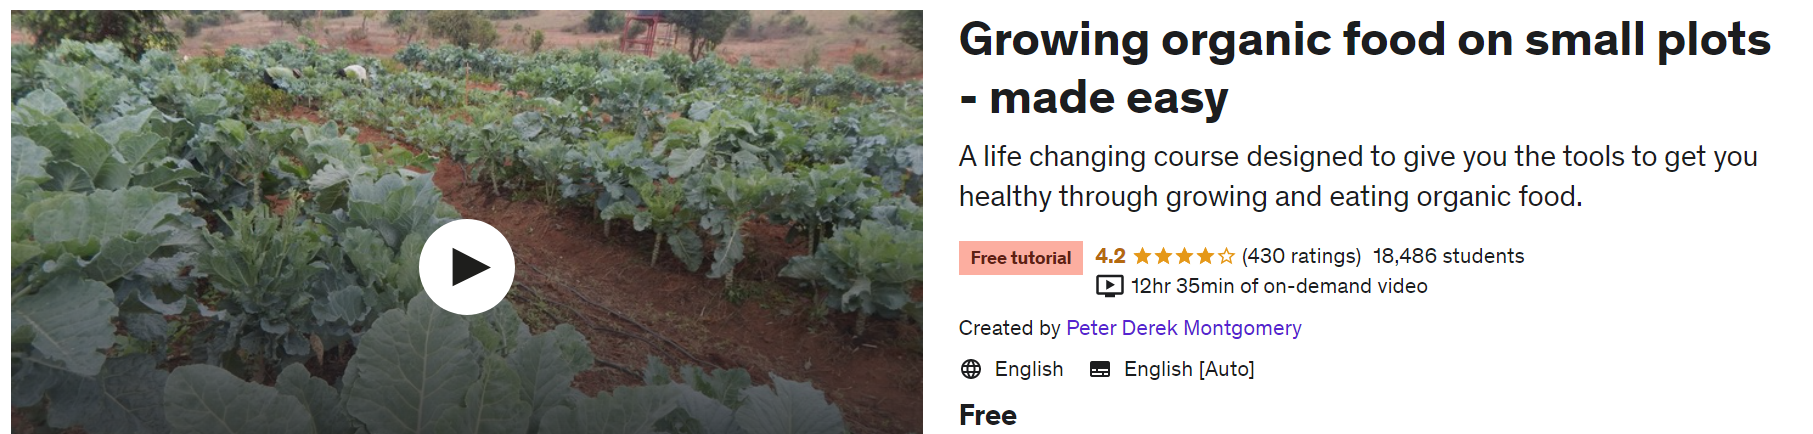 Growing Organic Food On Small Plots - Made Easy